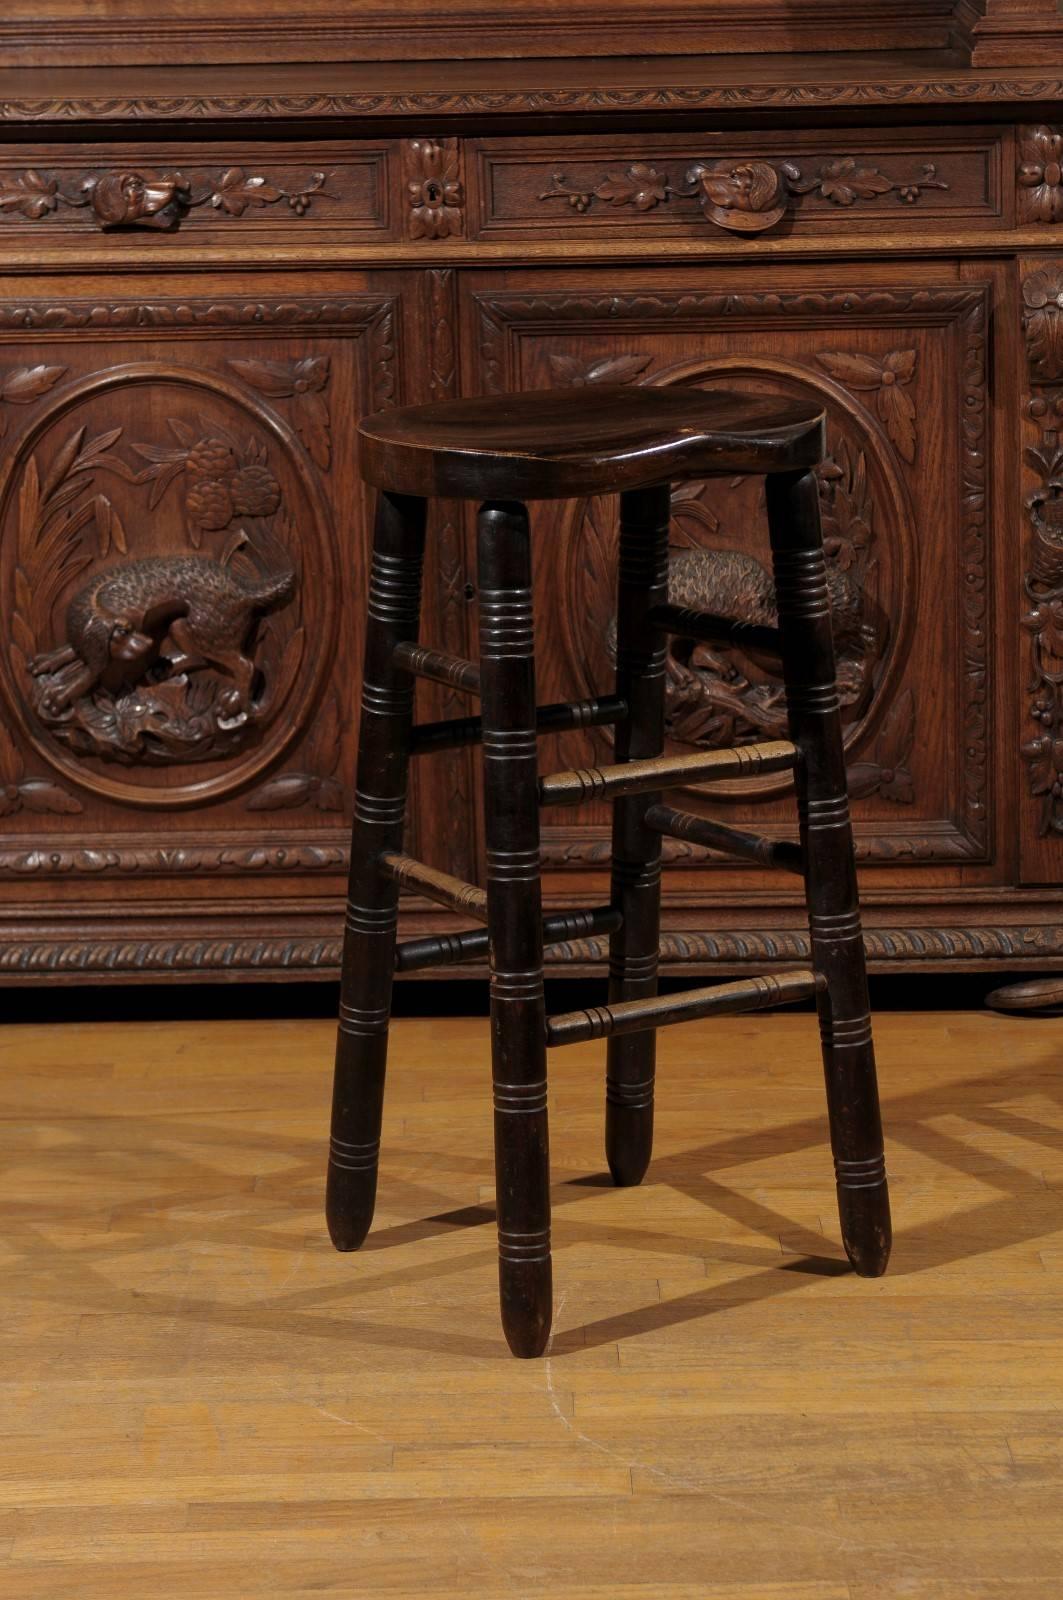 This is a lovely kitchen or bar stool. The rich finish on this stool will add class to any bar area. The British call it a bum stool. The shape of the seat is like a saddle and is extremely comfortable.